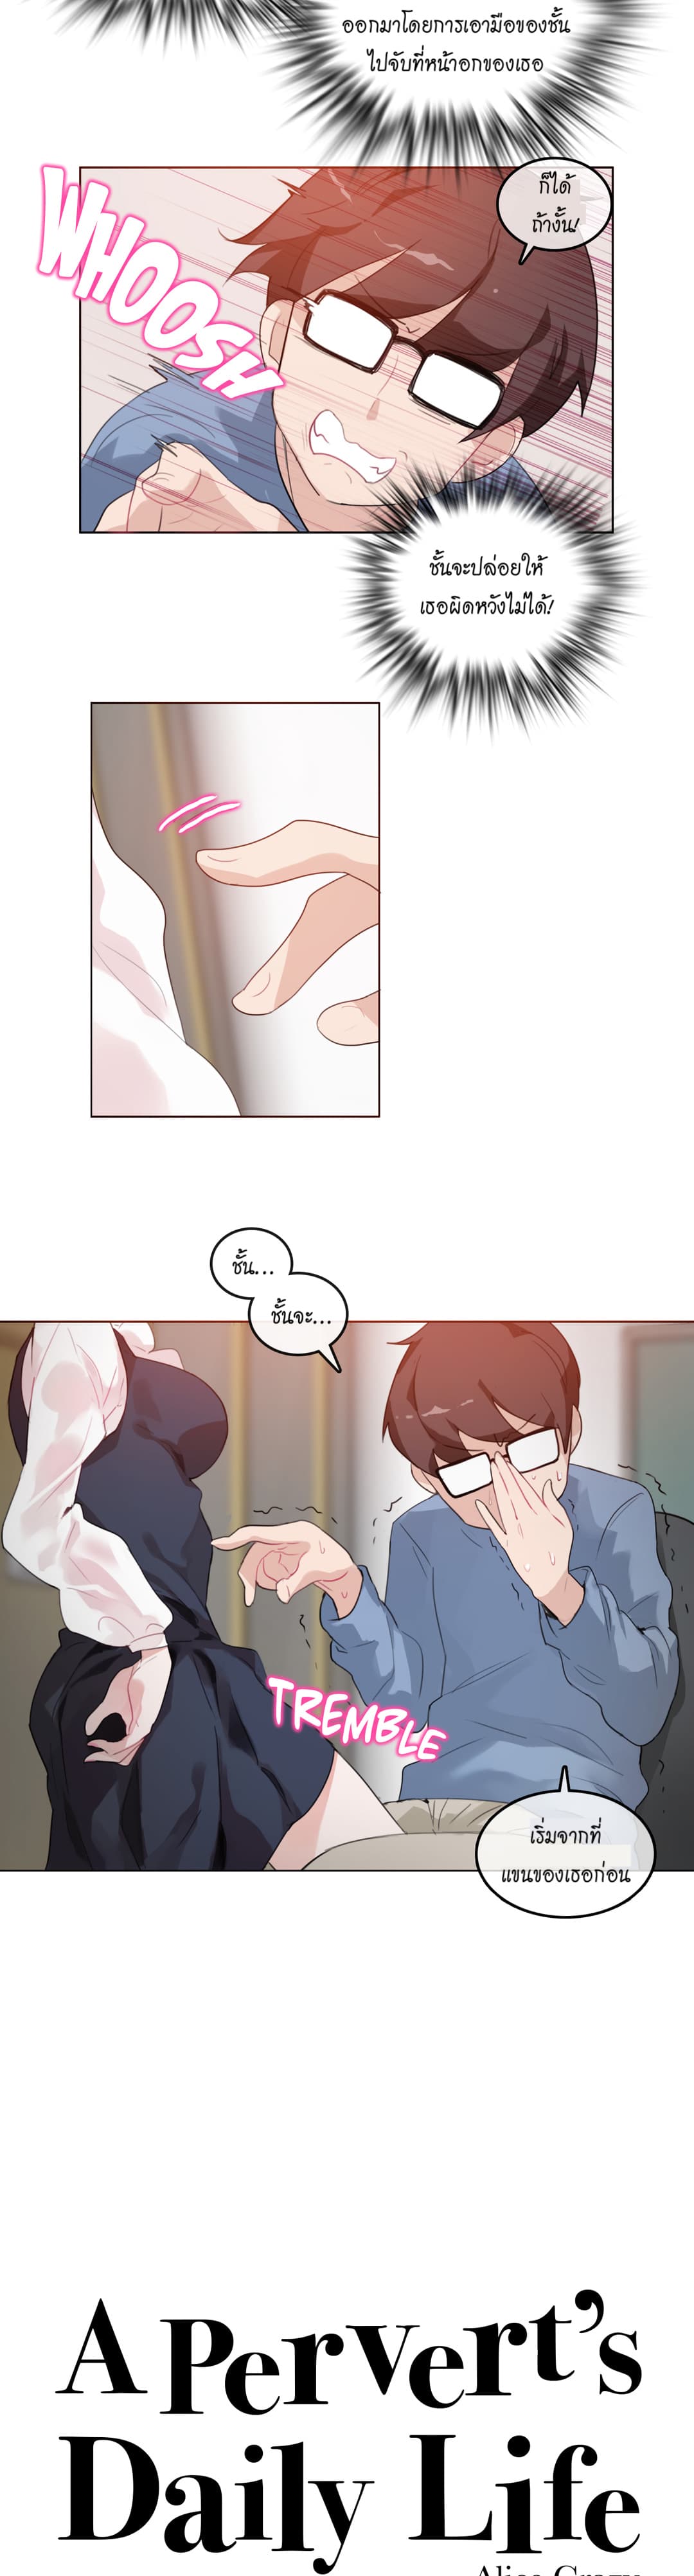 A Pervert’s Daily Life 24 (3)